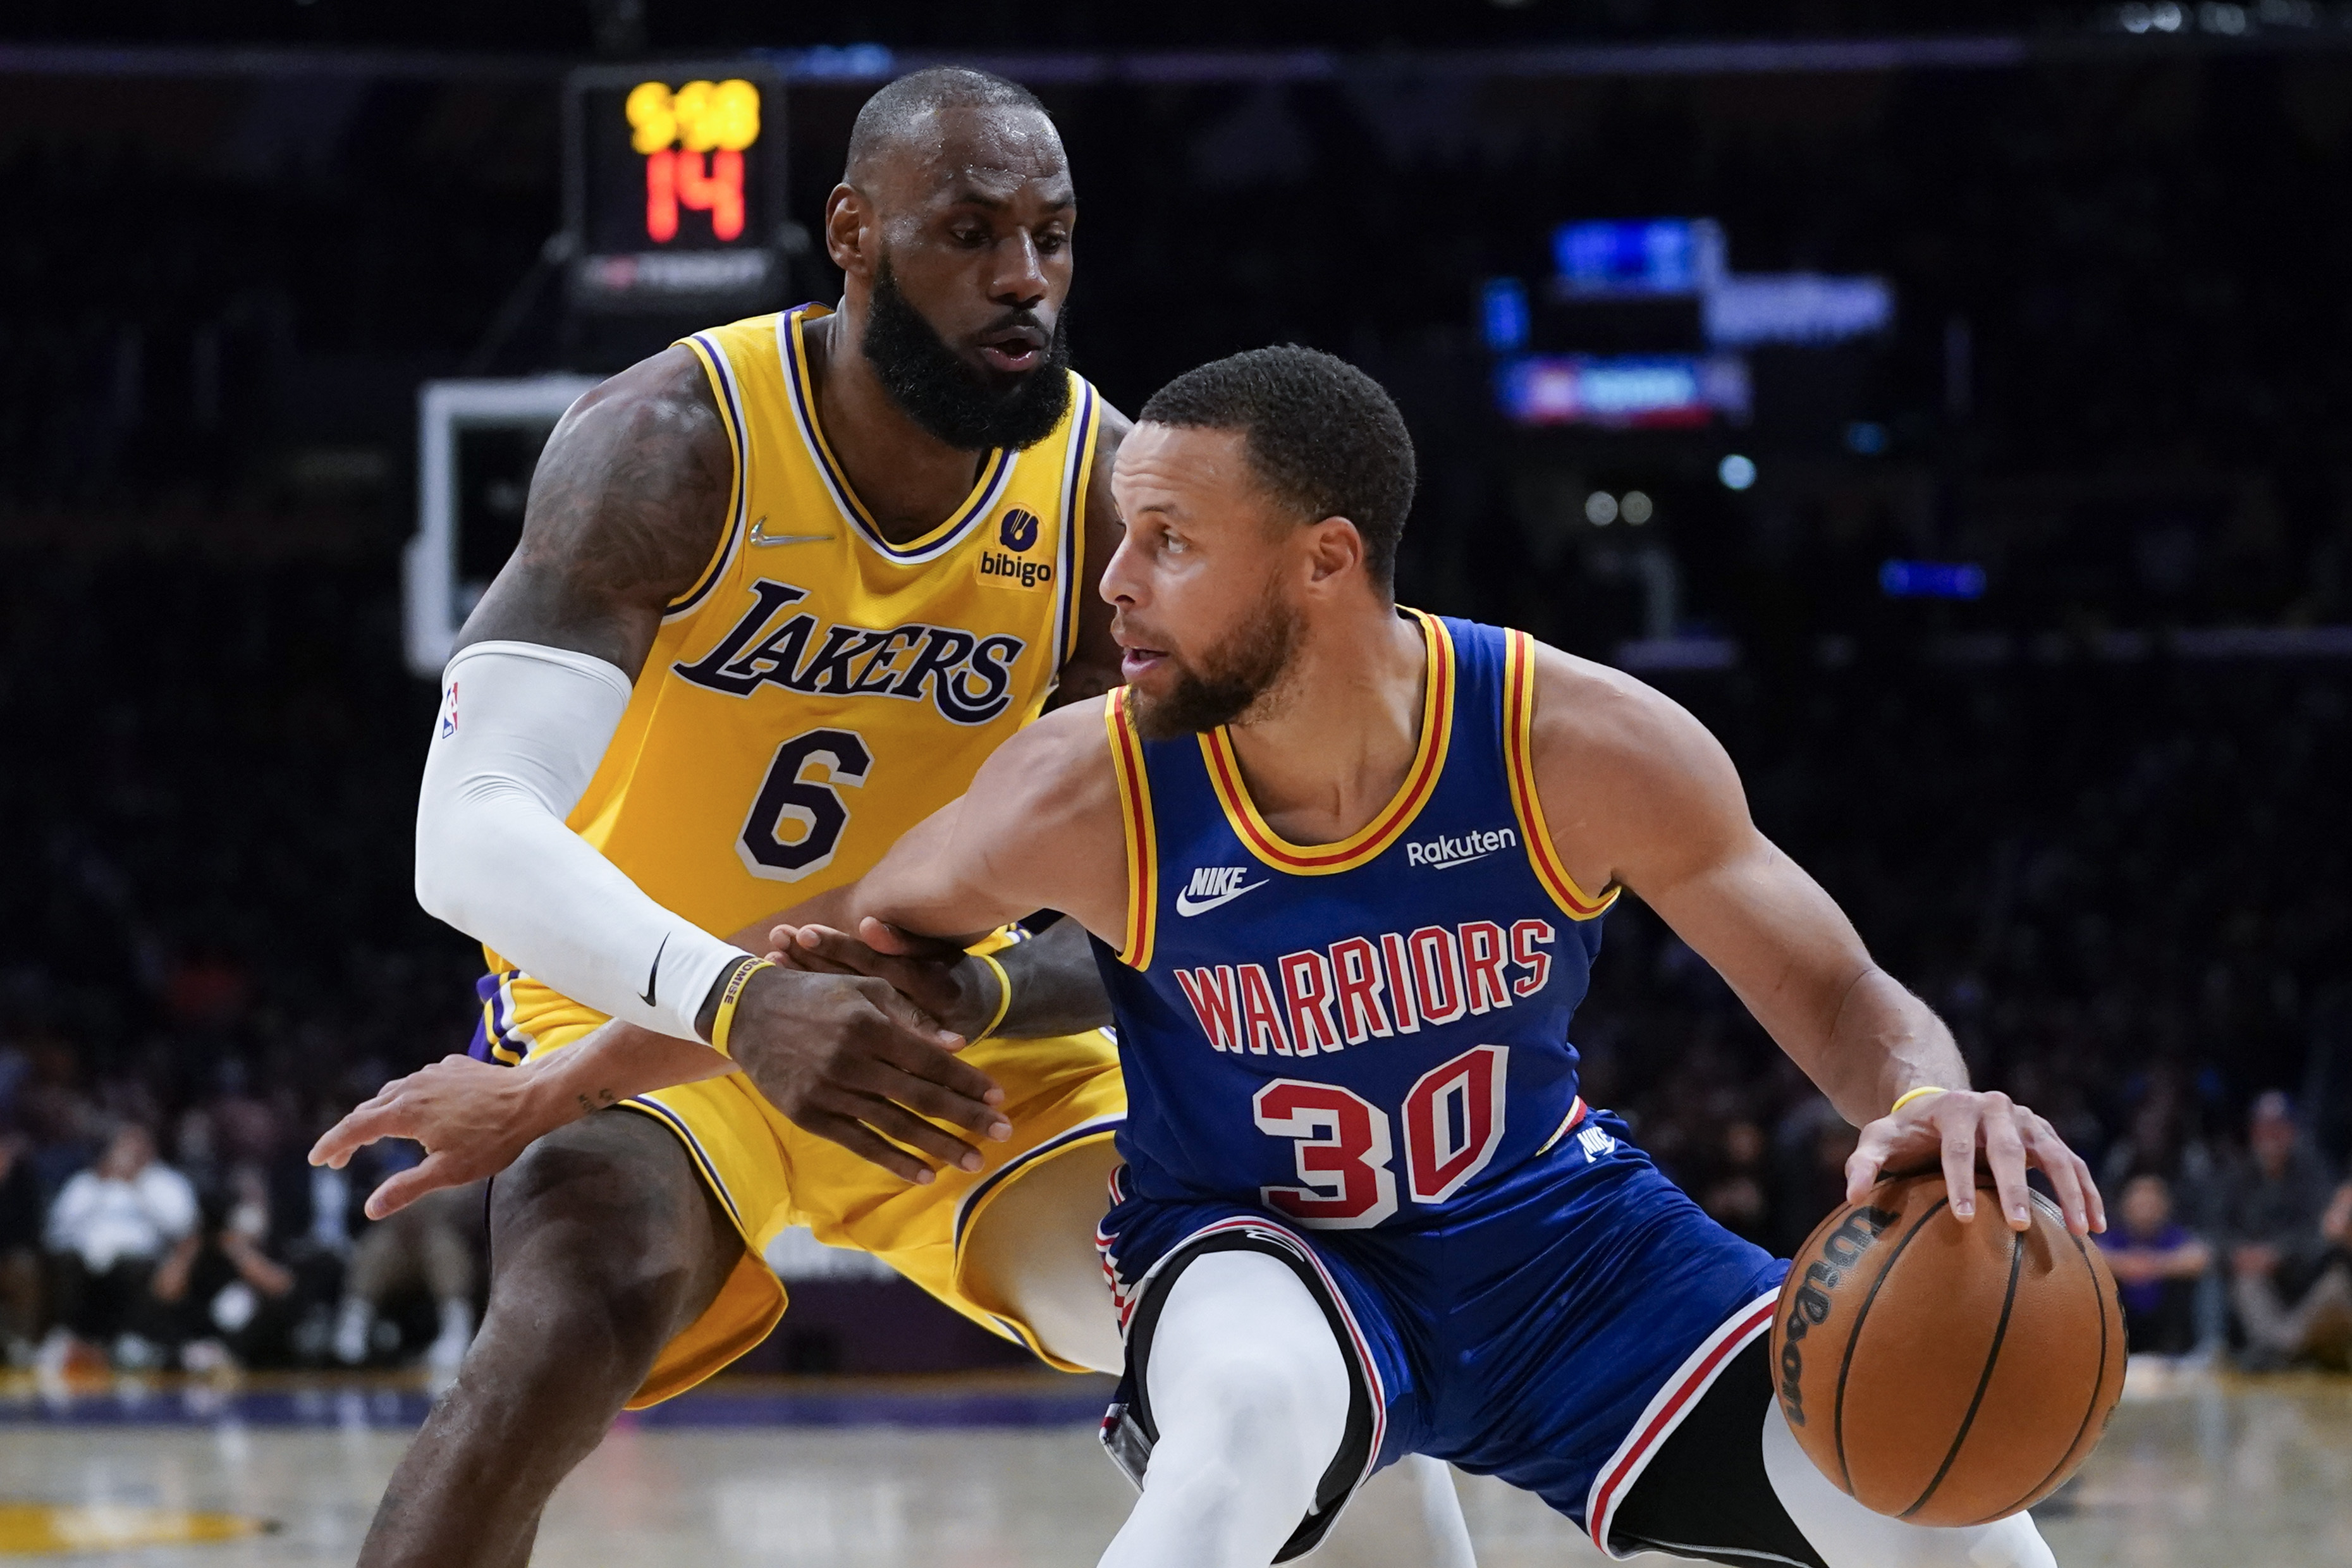 Los Angeles Lakers vs Golden State Warriors Oct 18, 2022 Game